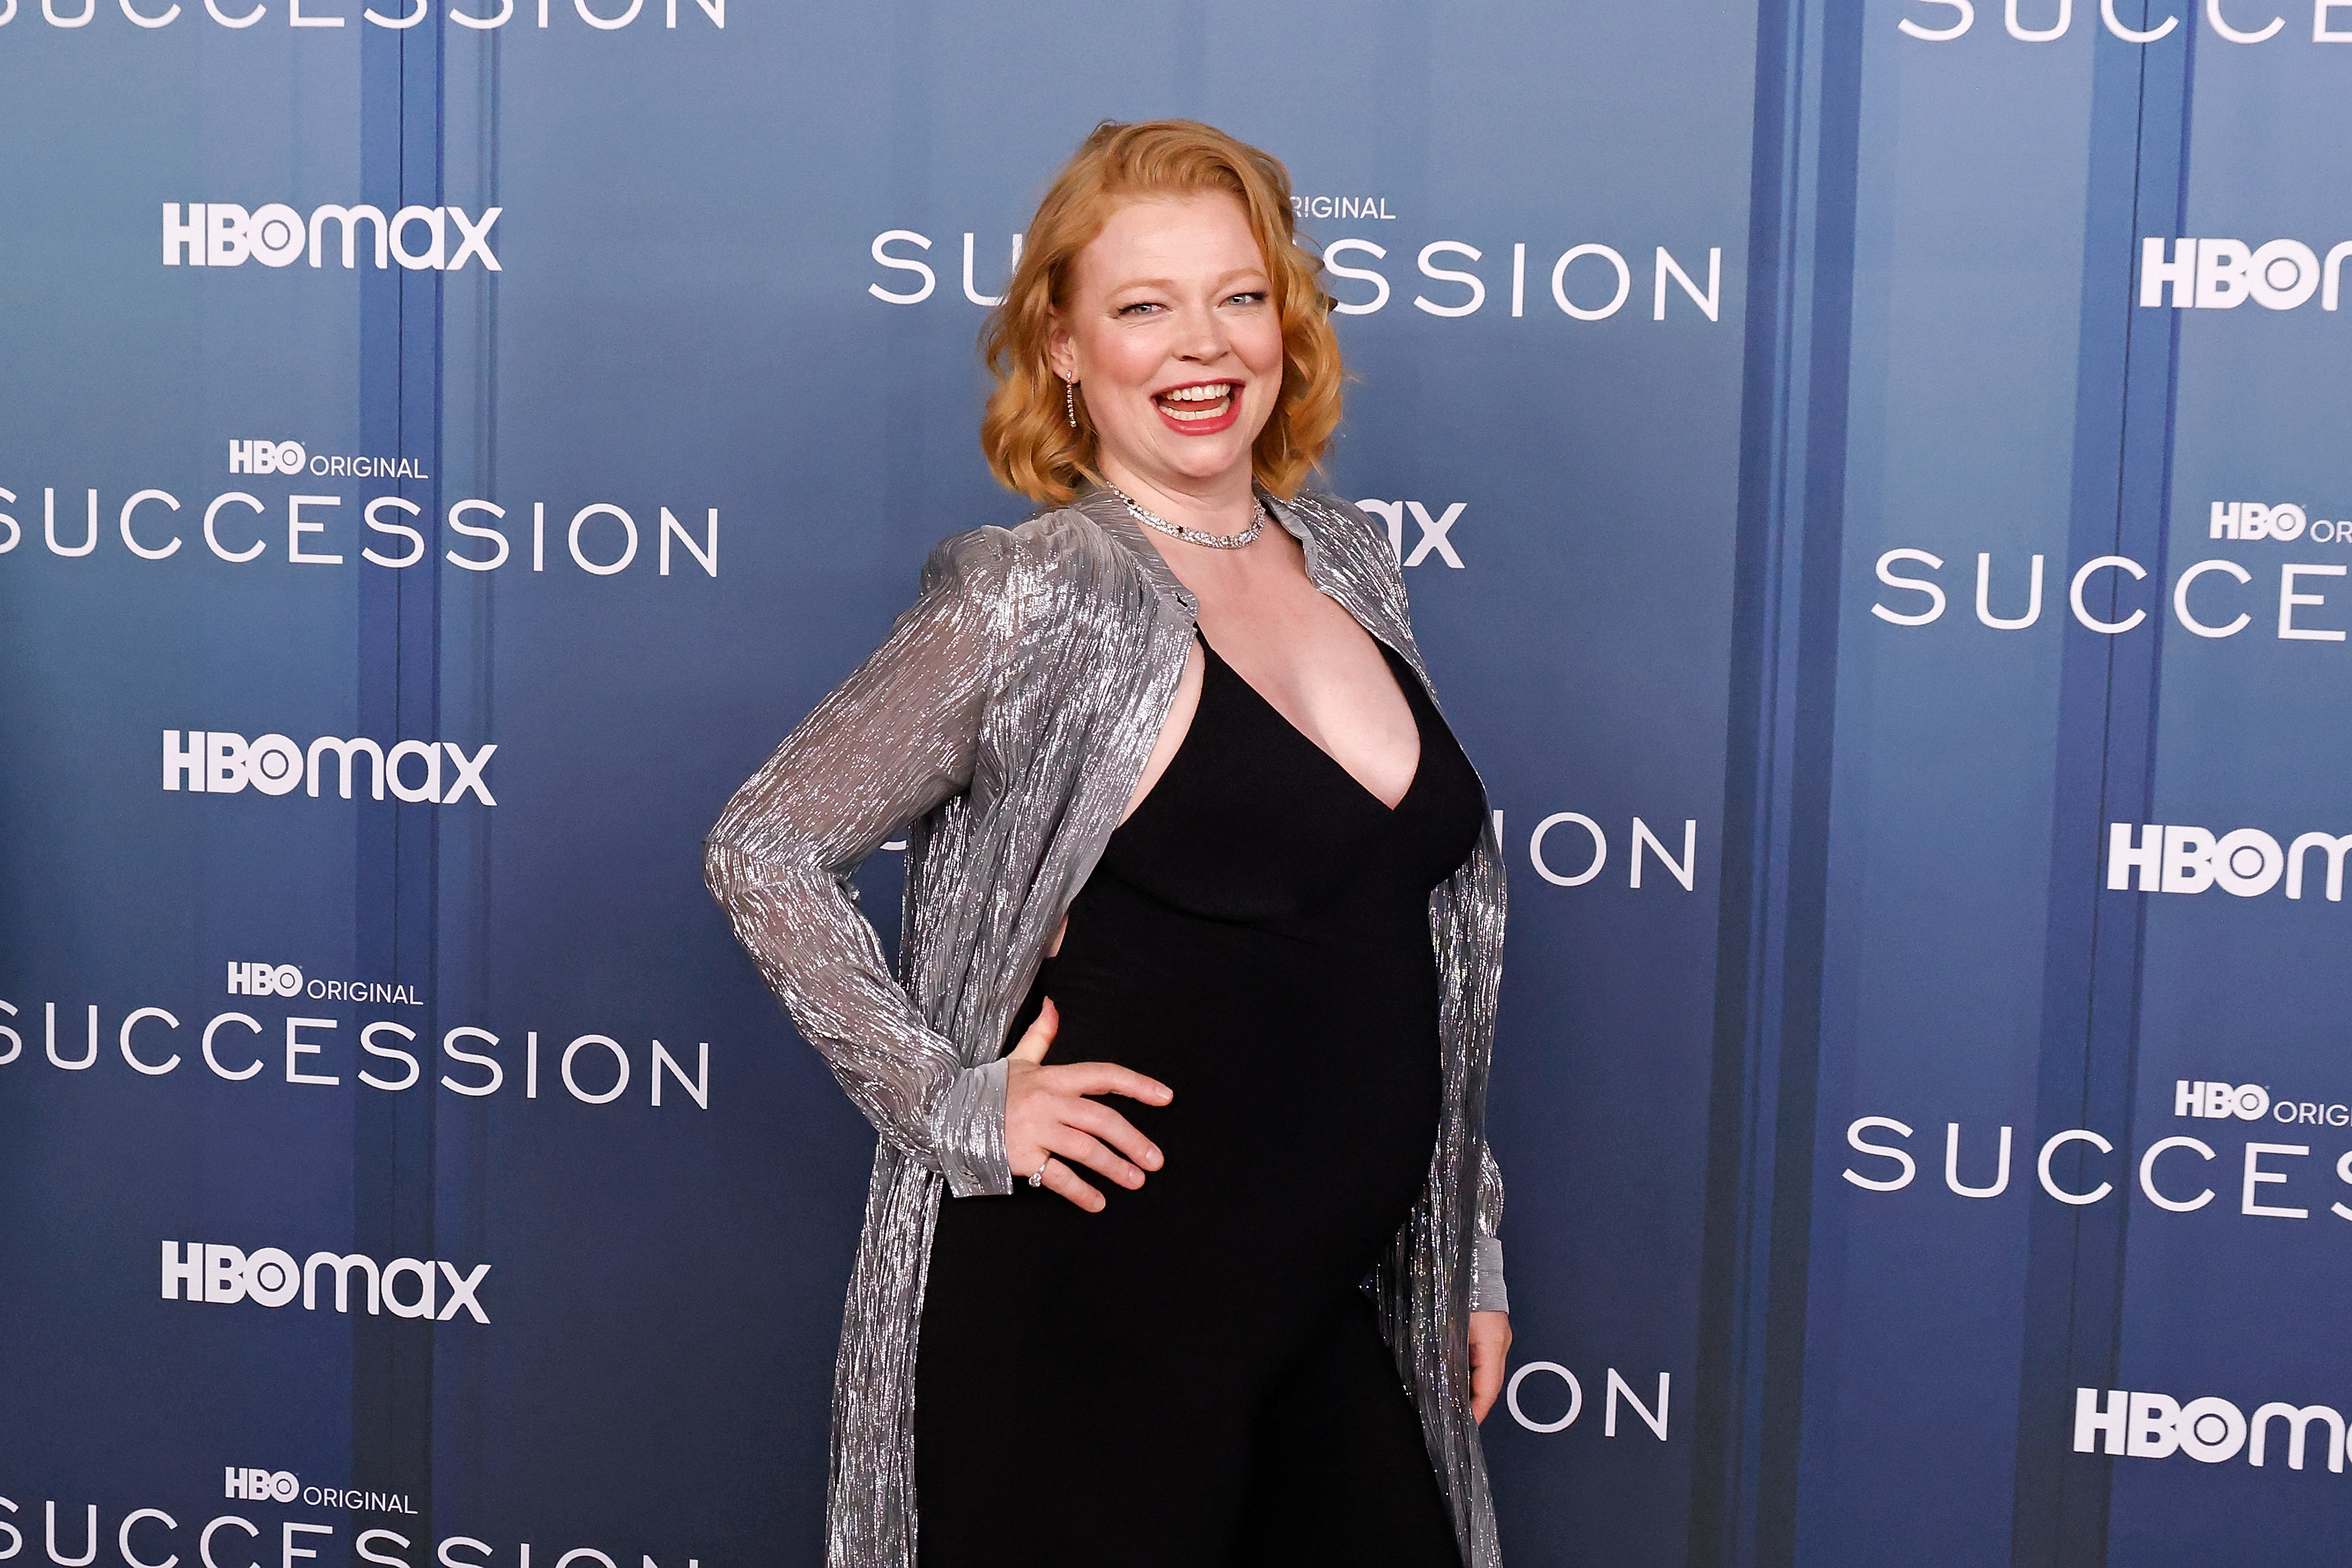 ‘Succession’ Star Sarah Snook Welcomes Baby – NBC 7 San Diego